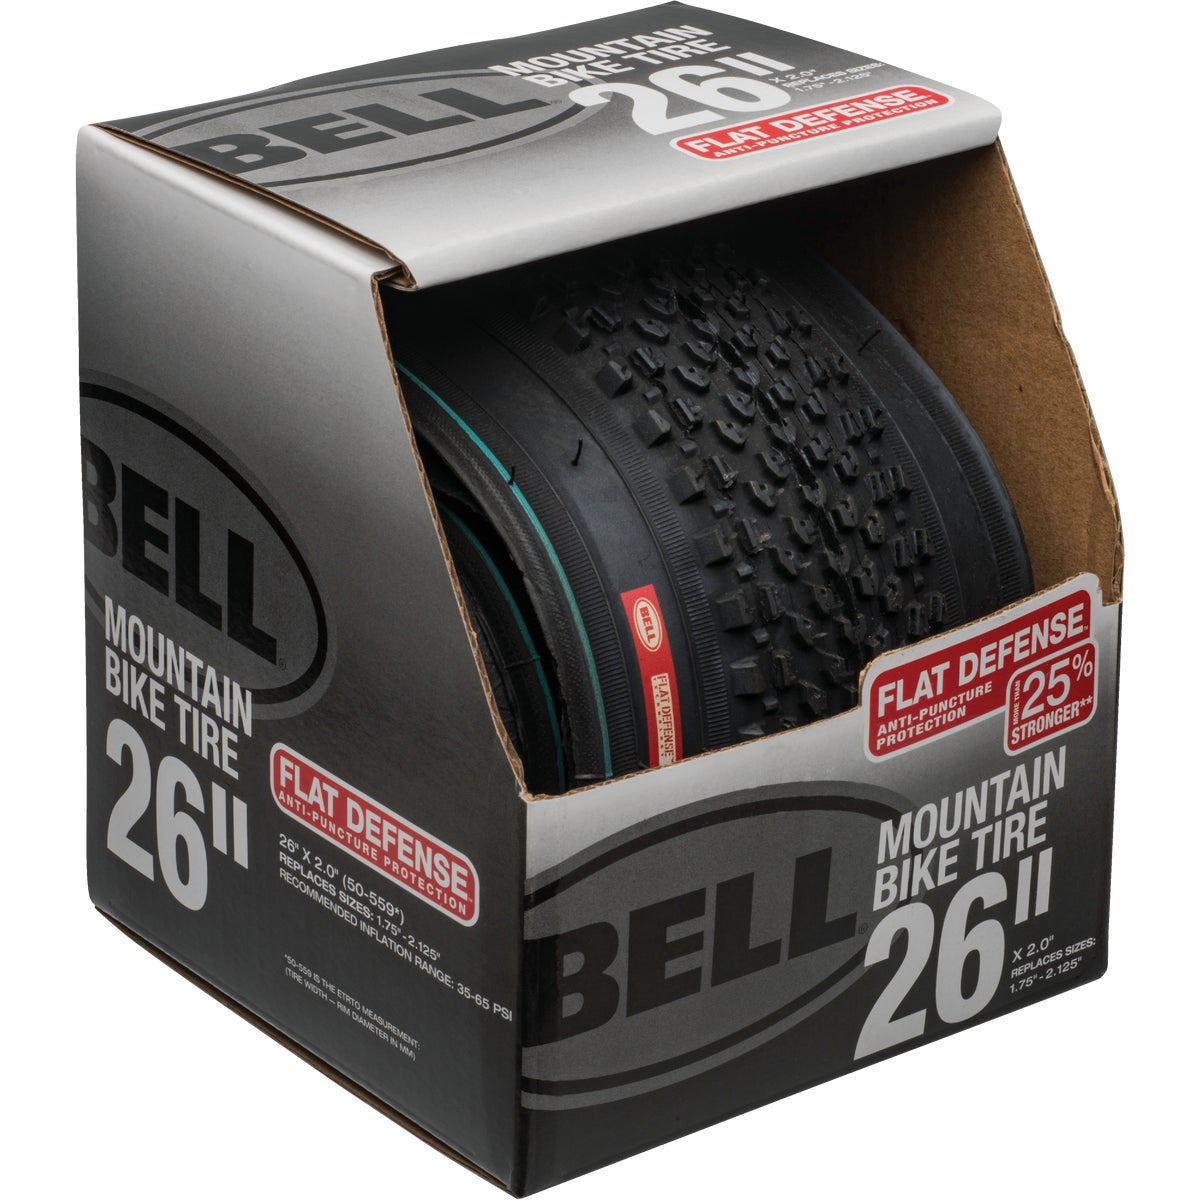 Item 809227, 26-inch mountain bike tire with Flat Defense, an anti puncture protection 